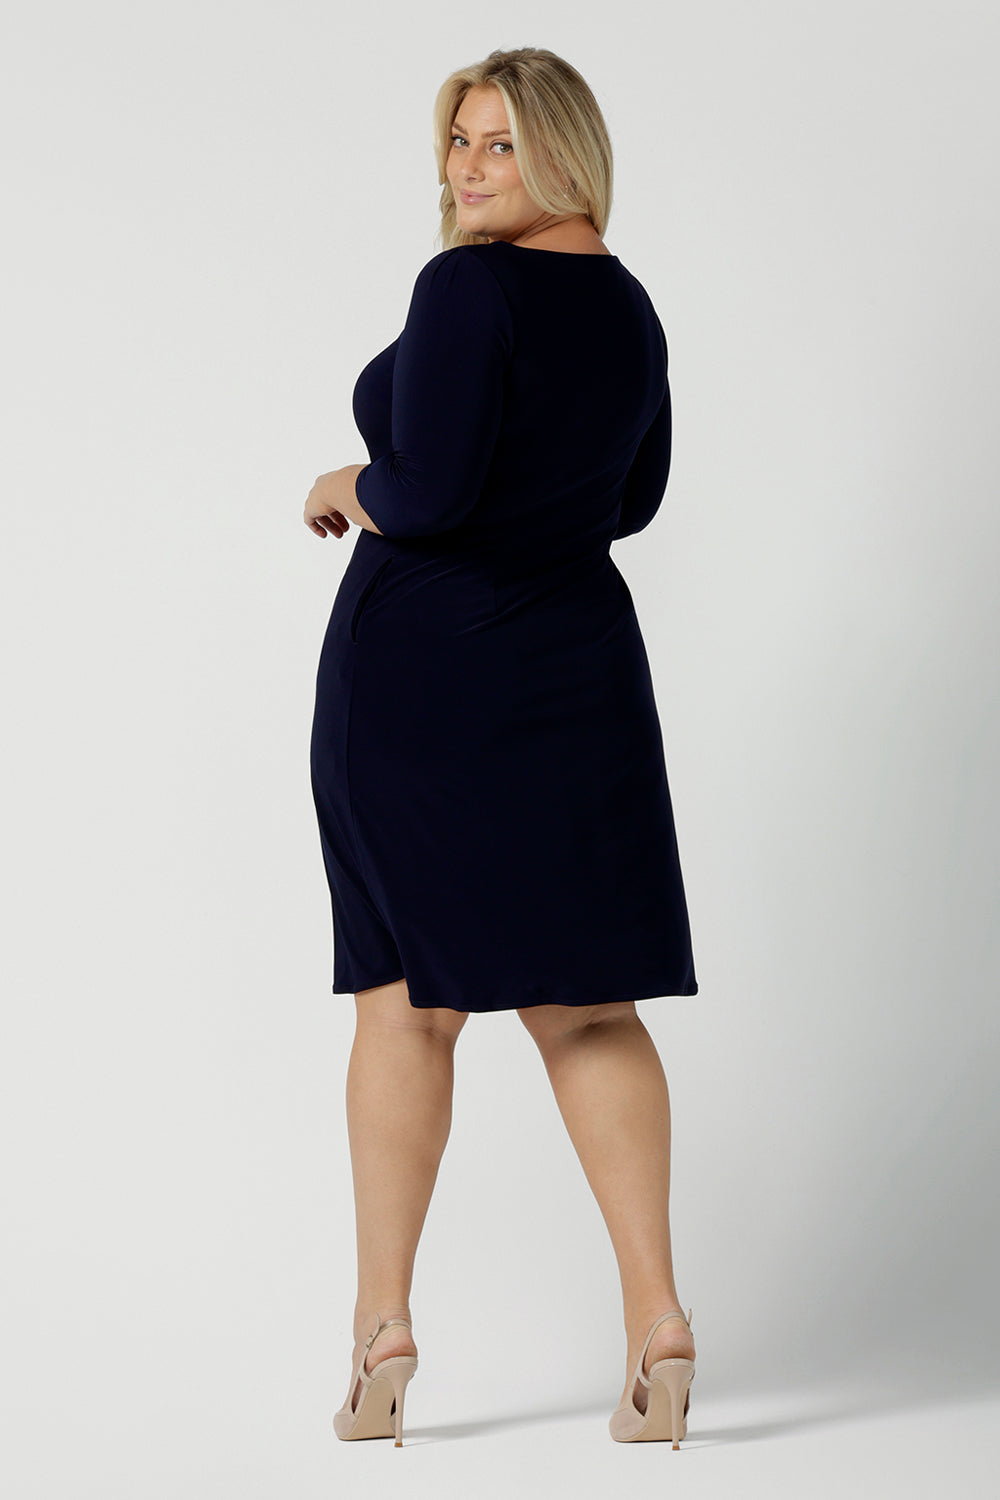 Back view of a size 18 woman wears the Audrey Shift Dress in Navy is the perfect all season shift dress. Soft jersey fabric, 3/4 sleeves and pockets. Made in Australia for women size 8 - 24.